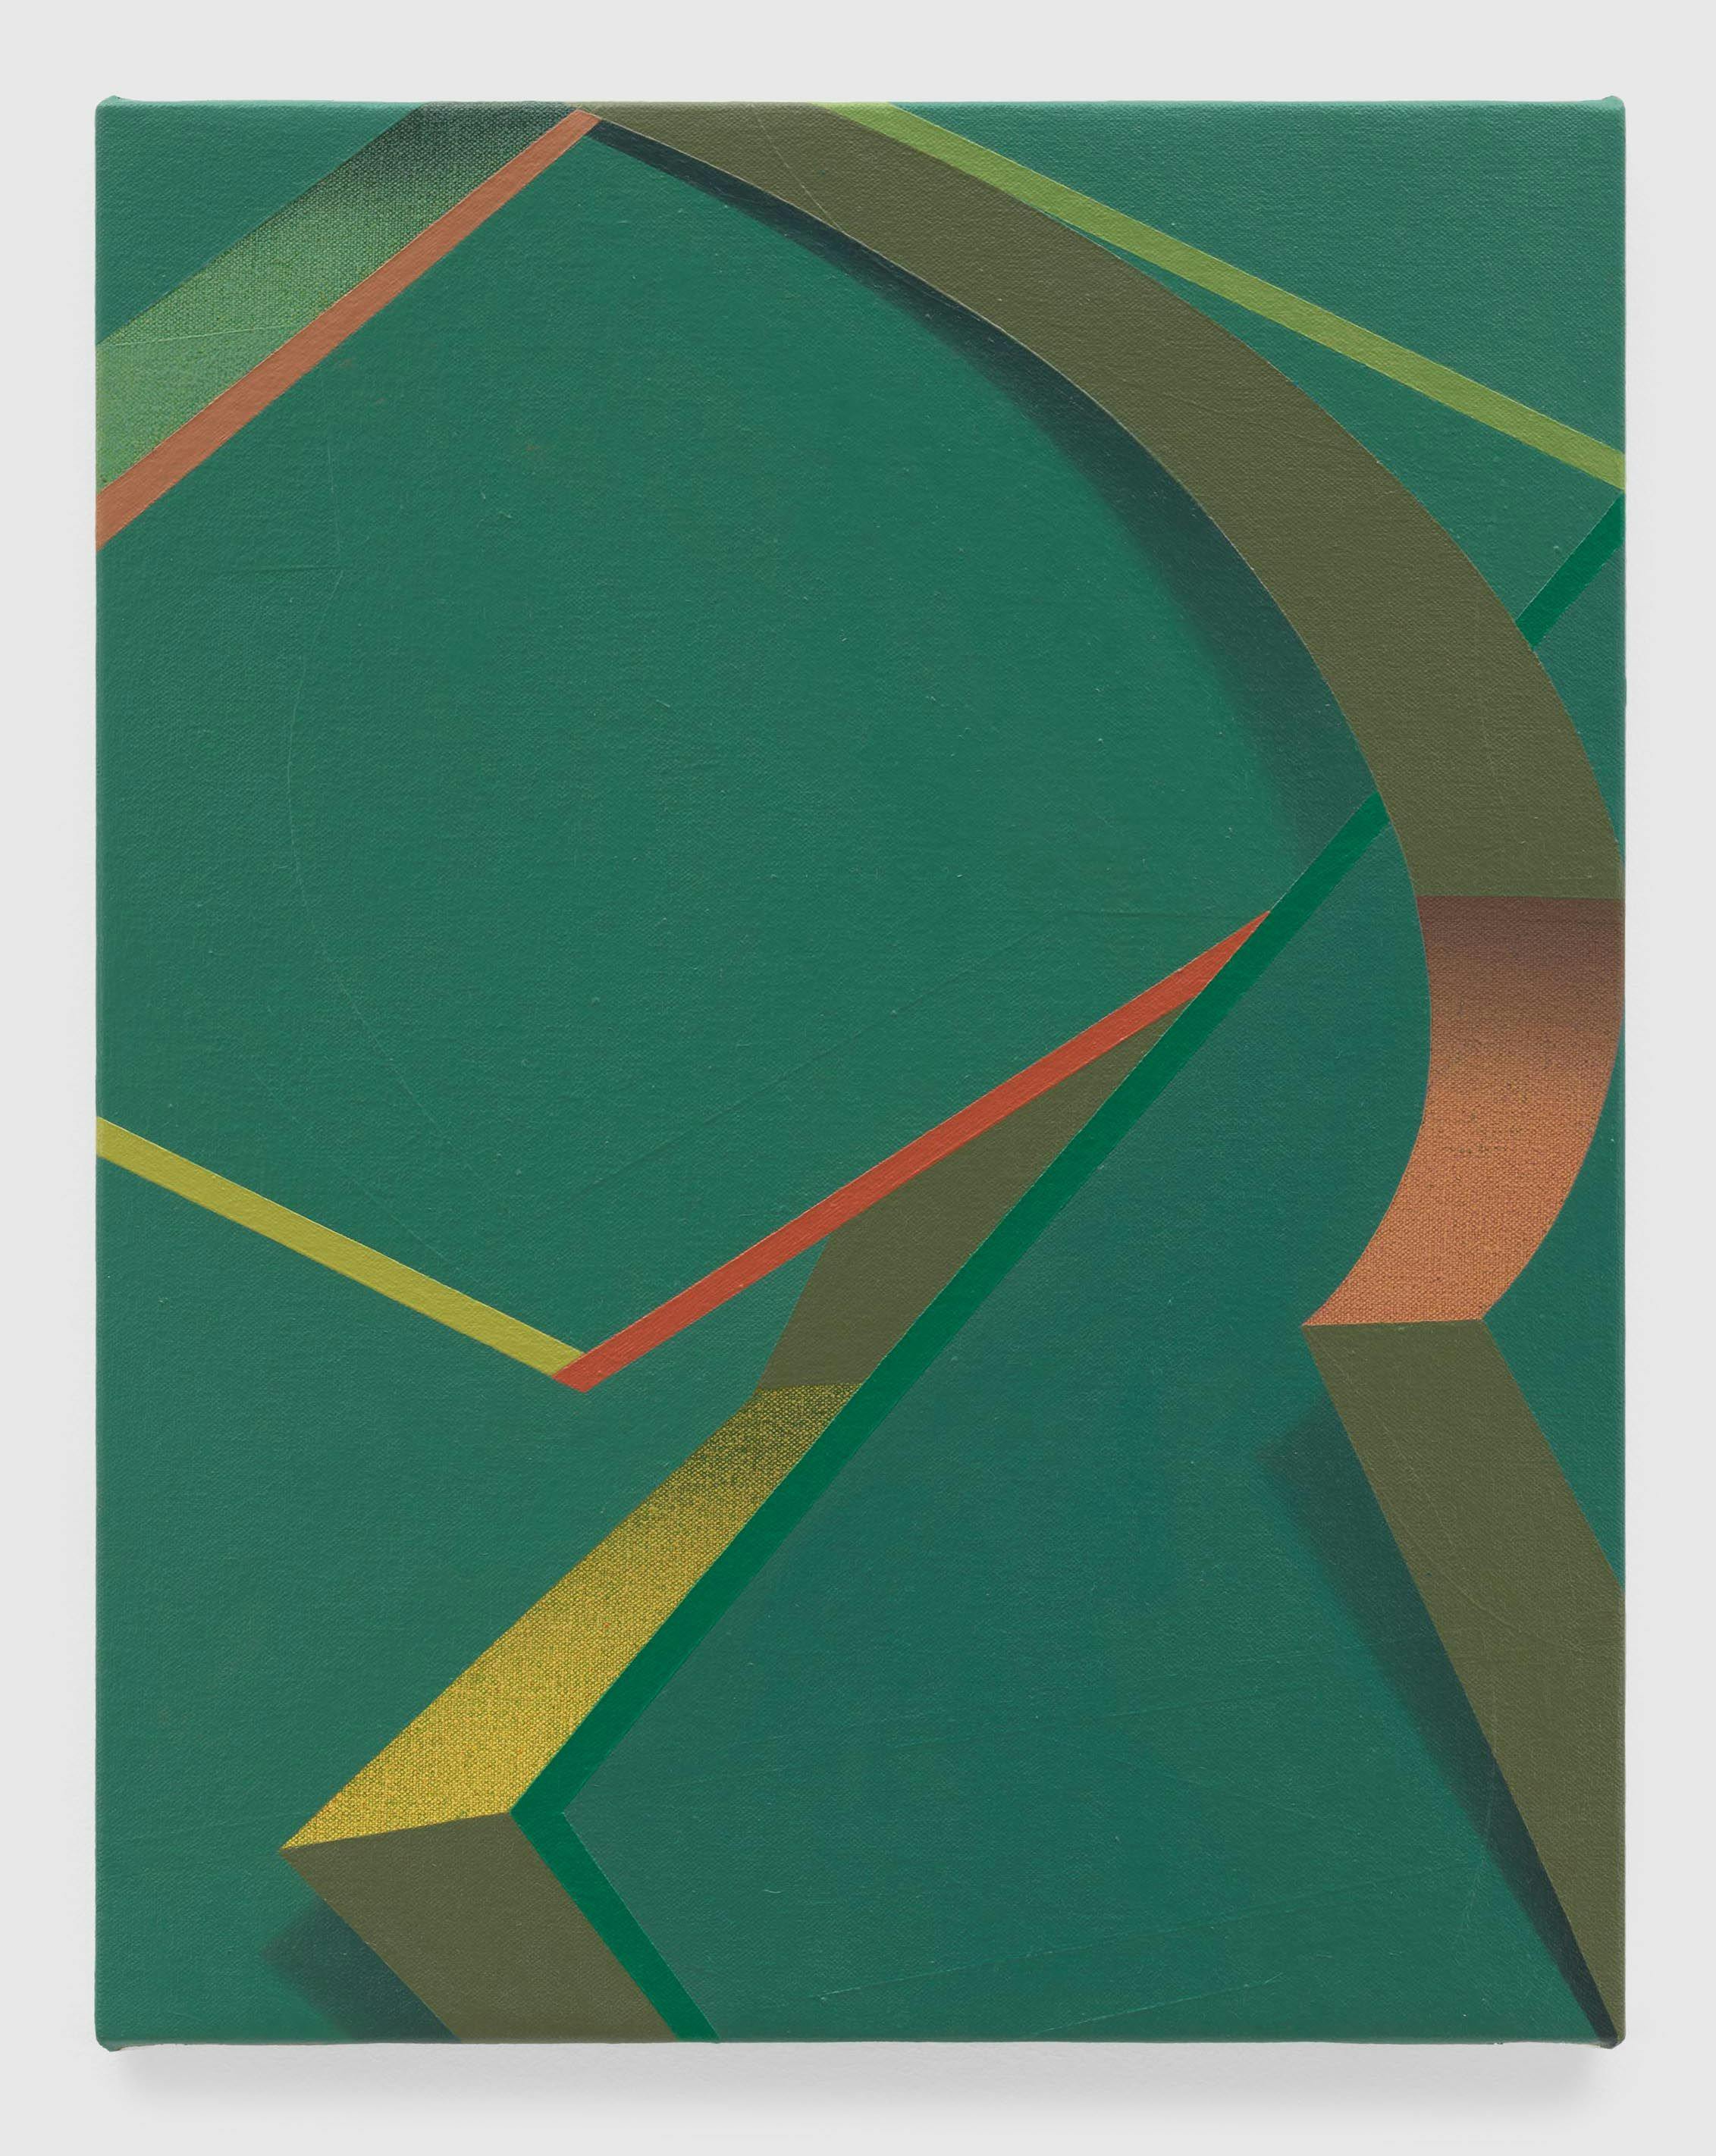 A painting by Tomma Abts, titled Bauwe, dated 2019.